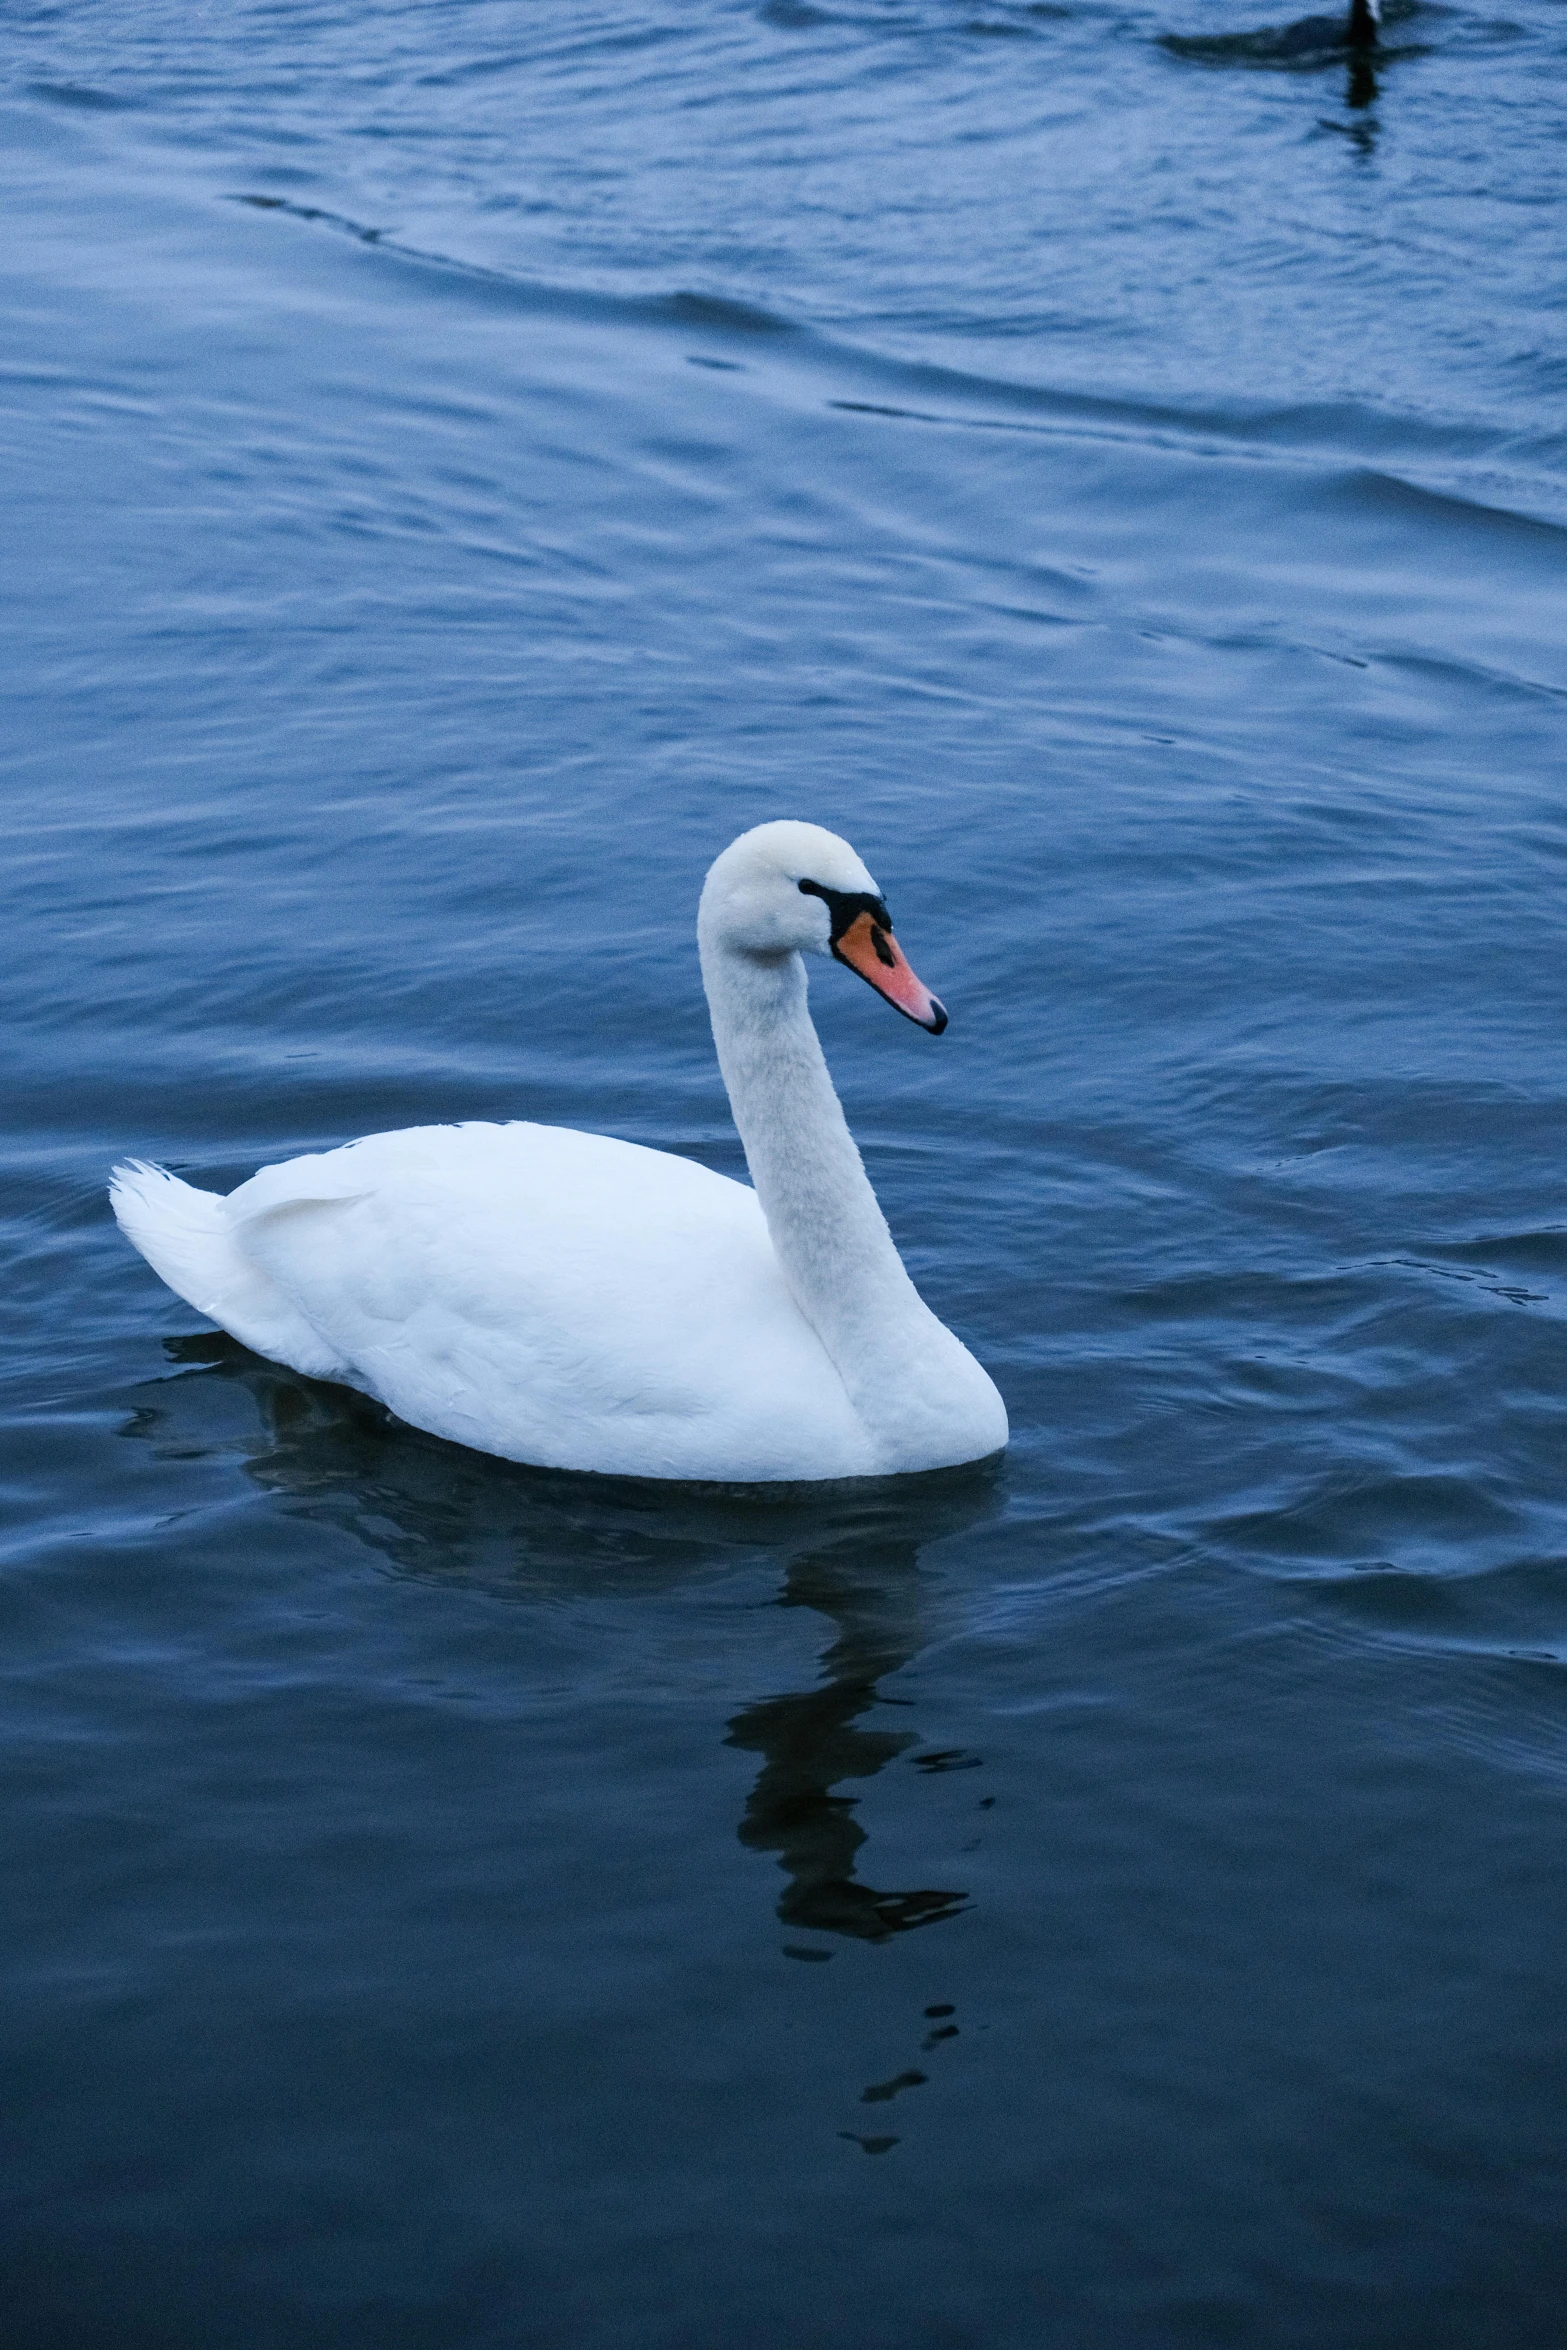 an image of two swans swimming in the lake